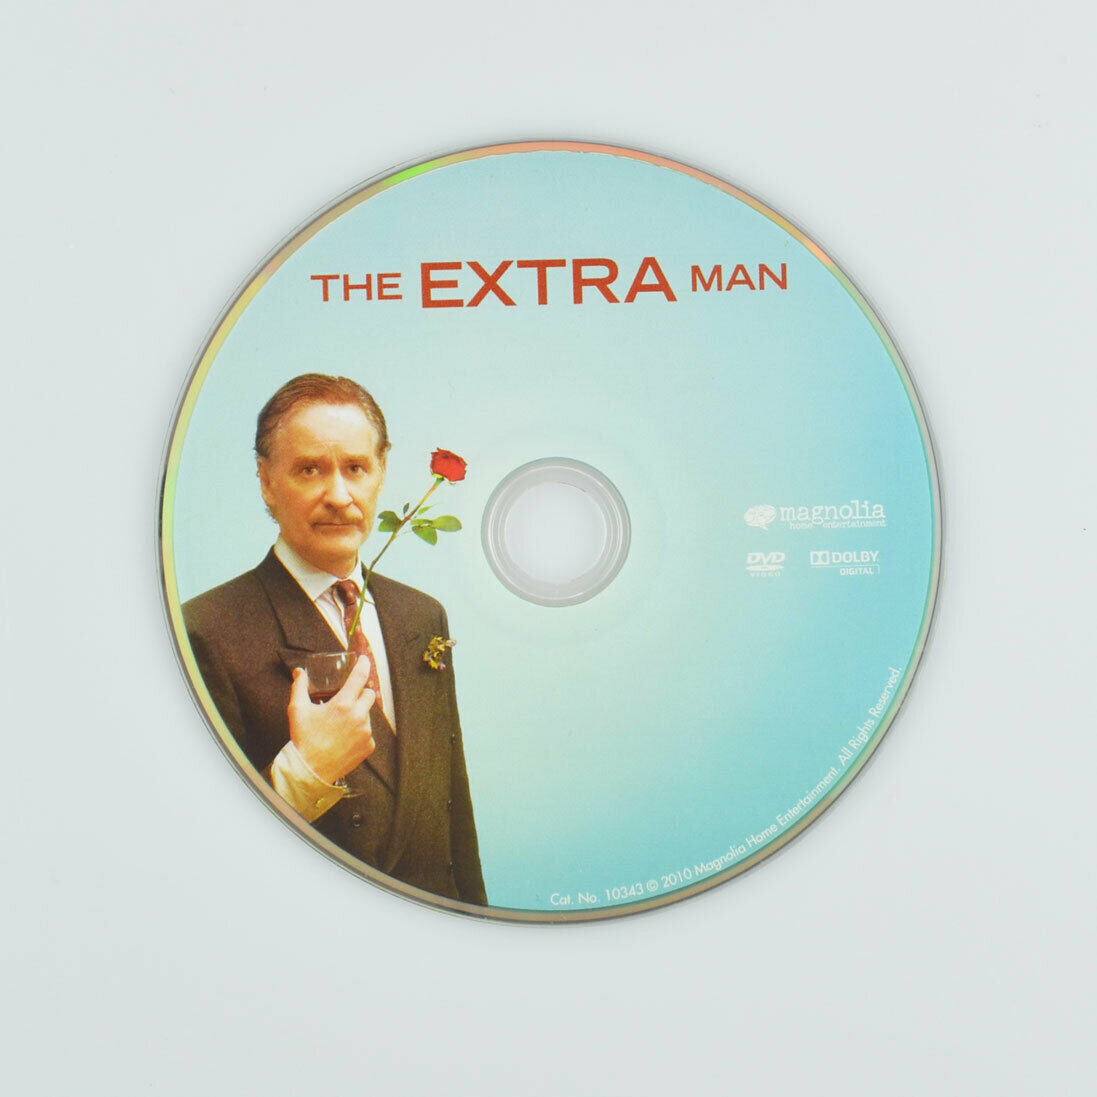 The Extra Man (DVD, 2010) Paul Dano, Kevin Kline, Katie Holmes - DISC ONLY